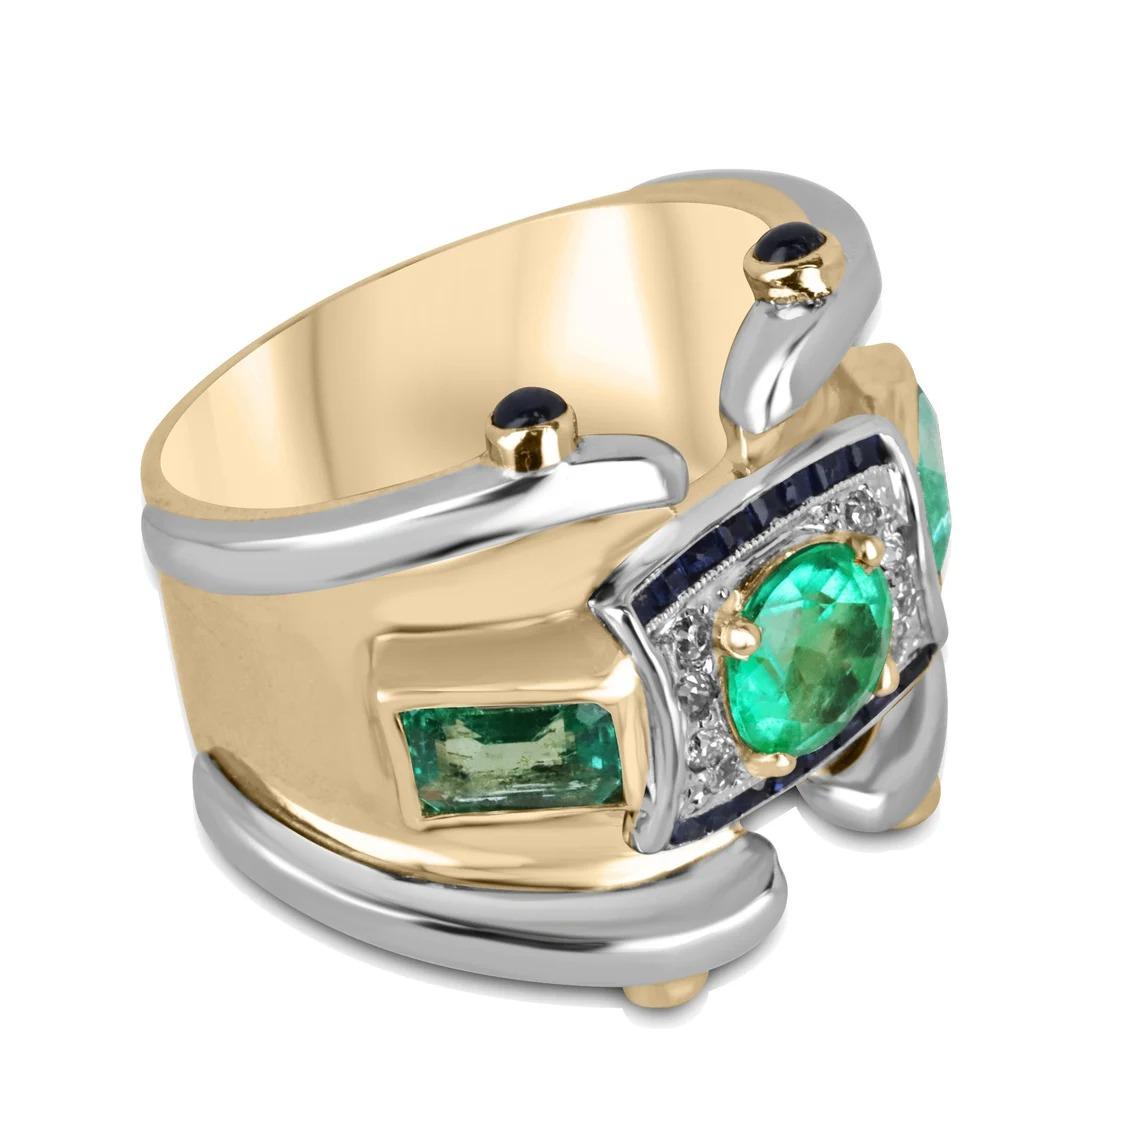 This exquisite ring features a stunning round-cut Colombian emerald as its centerpiece, displaying a vivid and remarkable green hue. Flanking the center gemstone are two emerald-cut emeralds set in an east-to-west orientation, adding an elegant